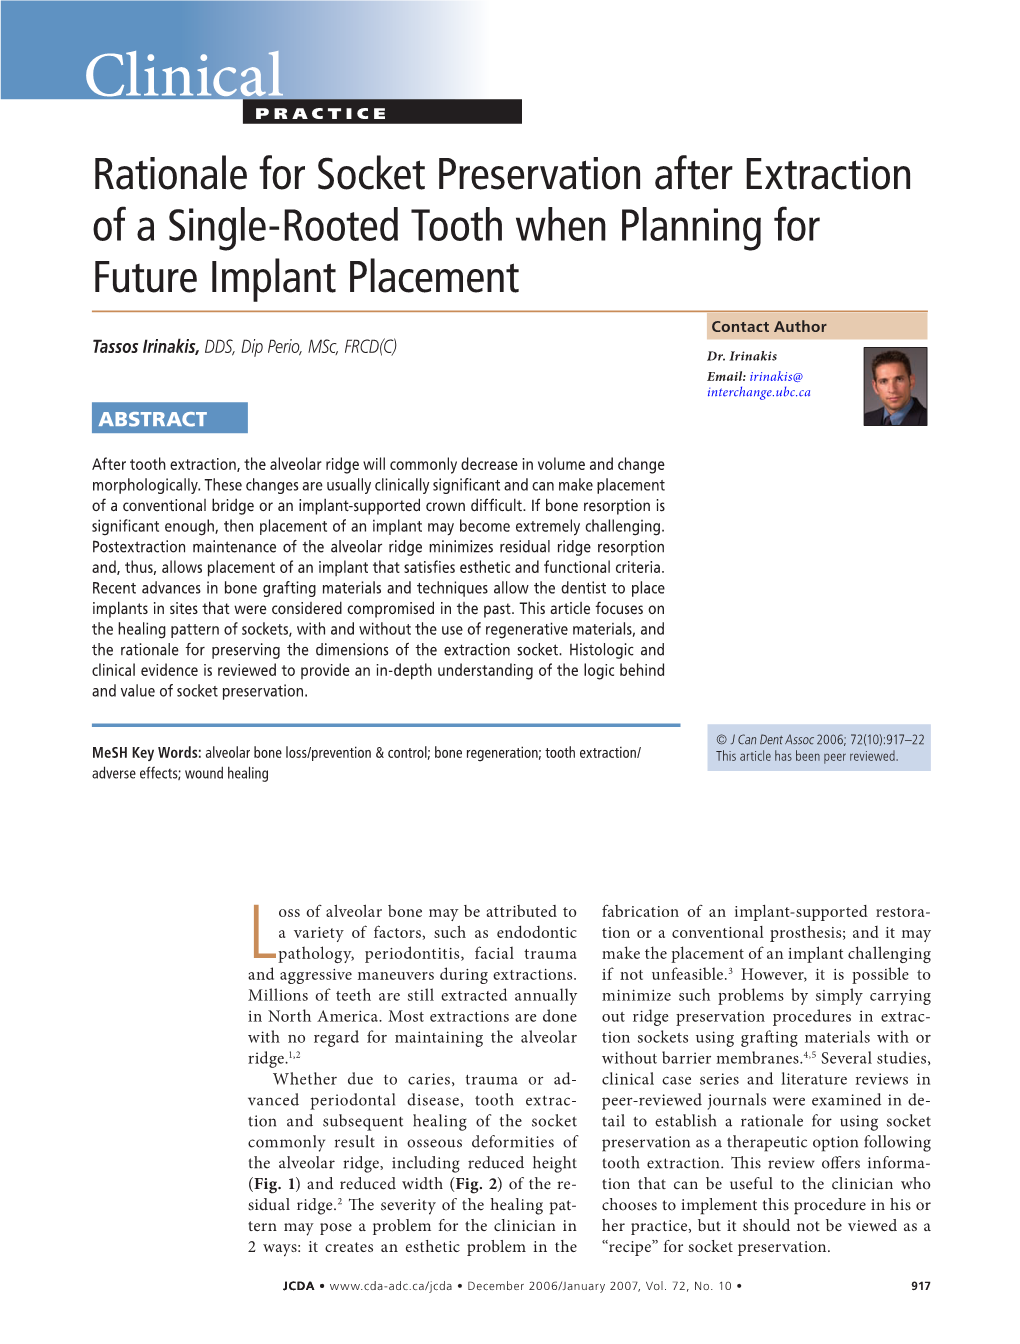 Rationale for Socket Preservation After Extraction of a Single-Rooted Tooth When Planning for Future Implant Placement